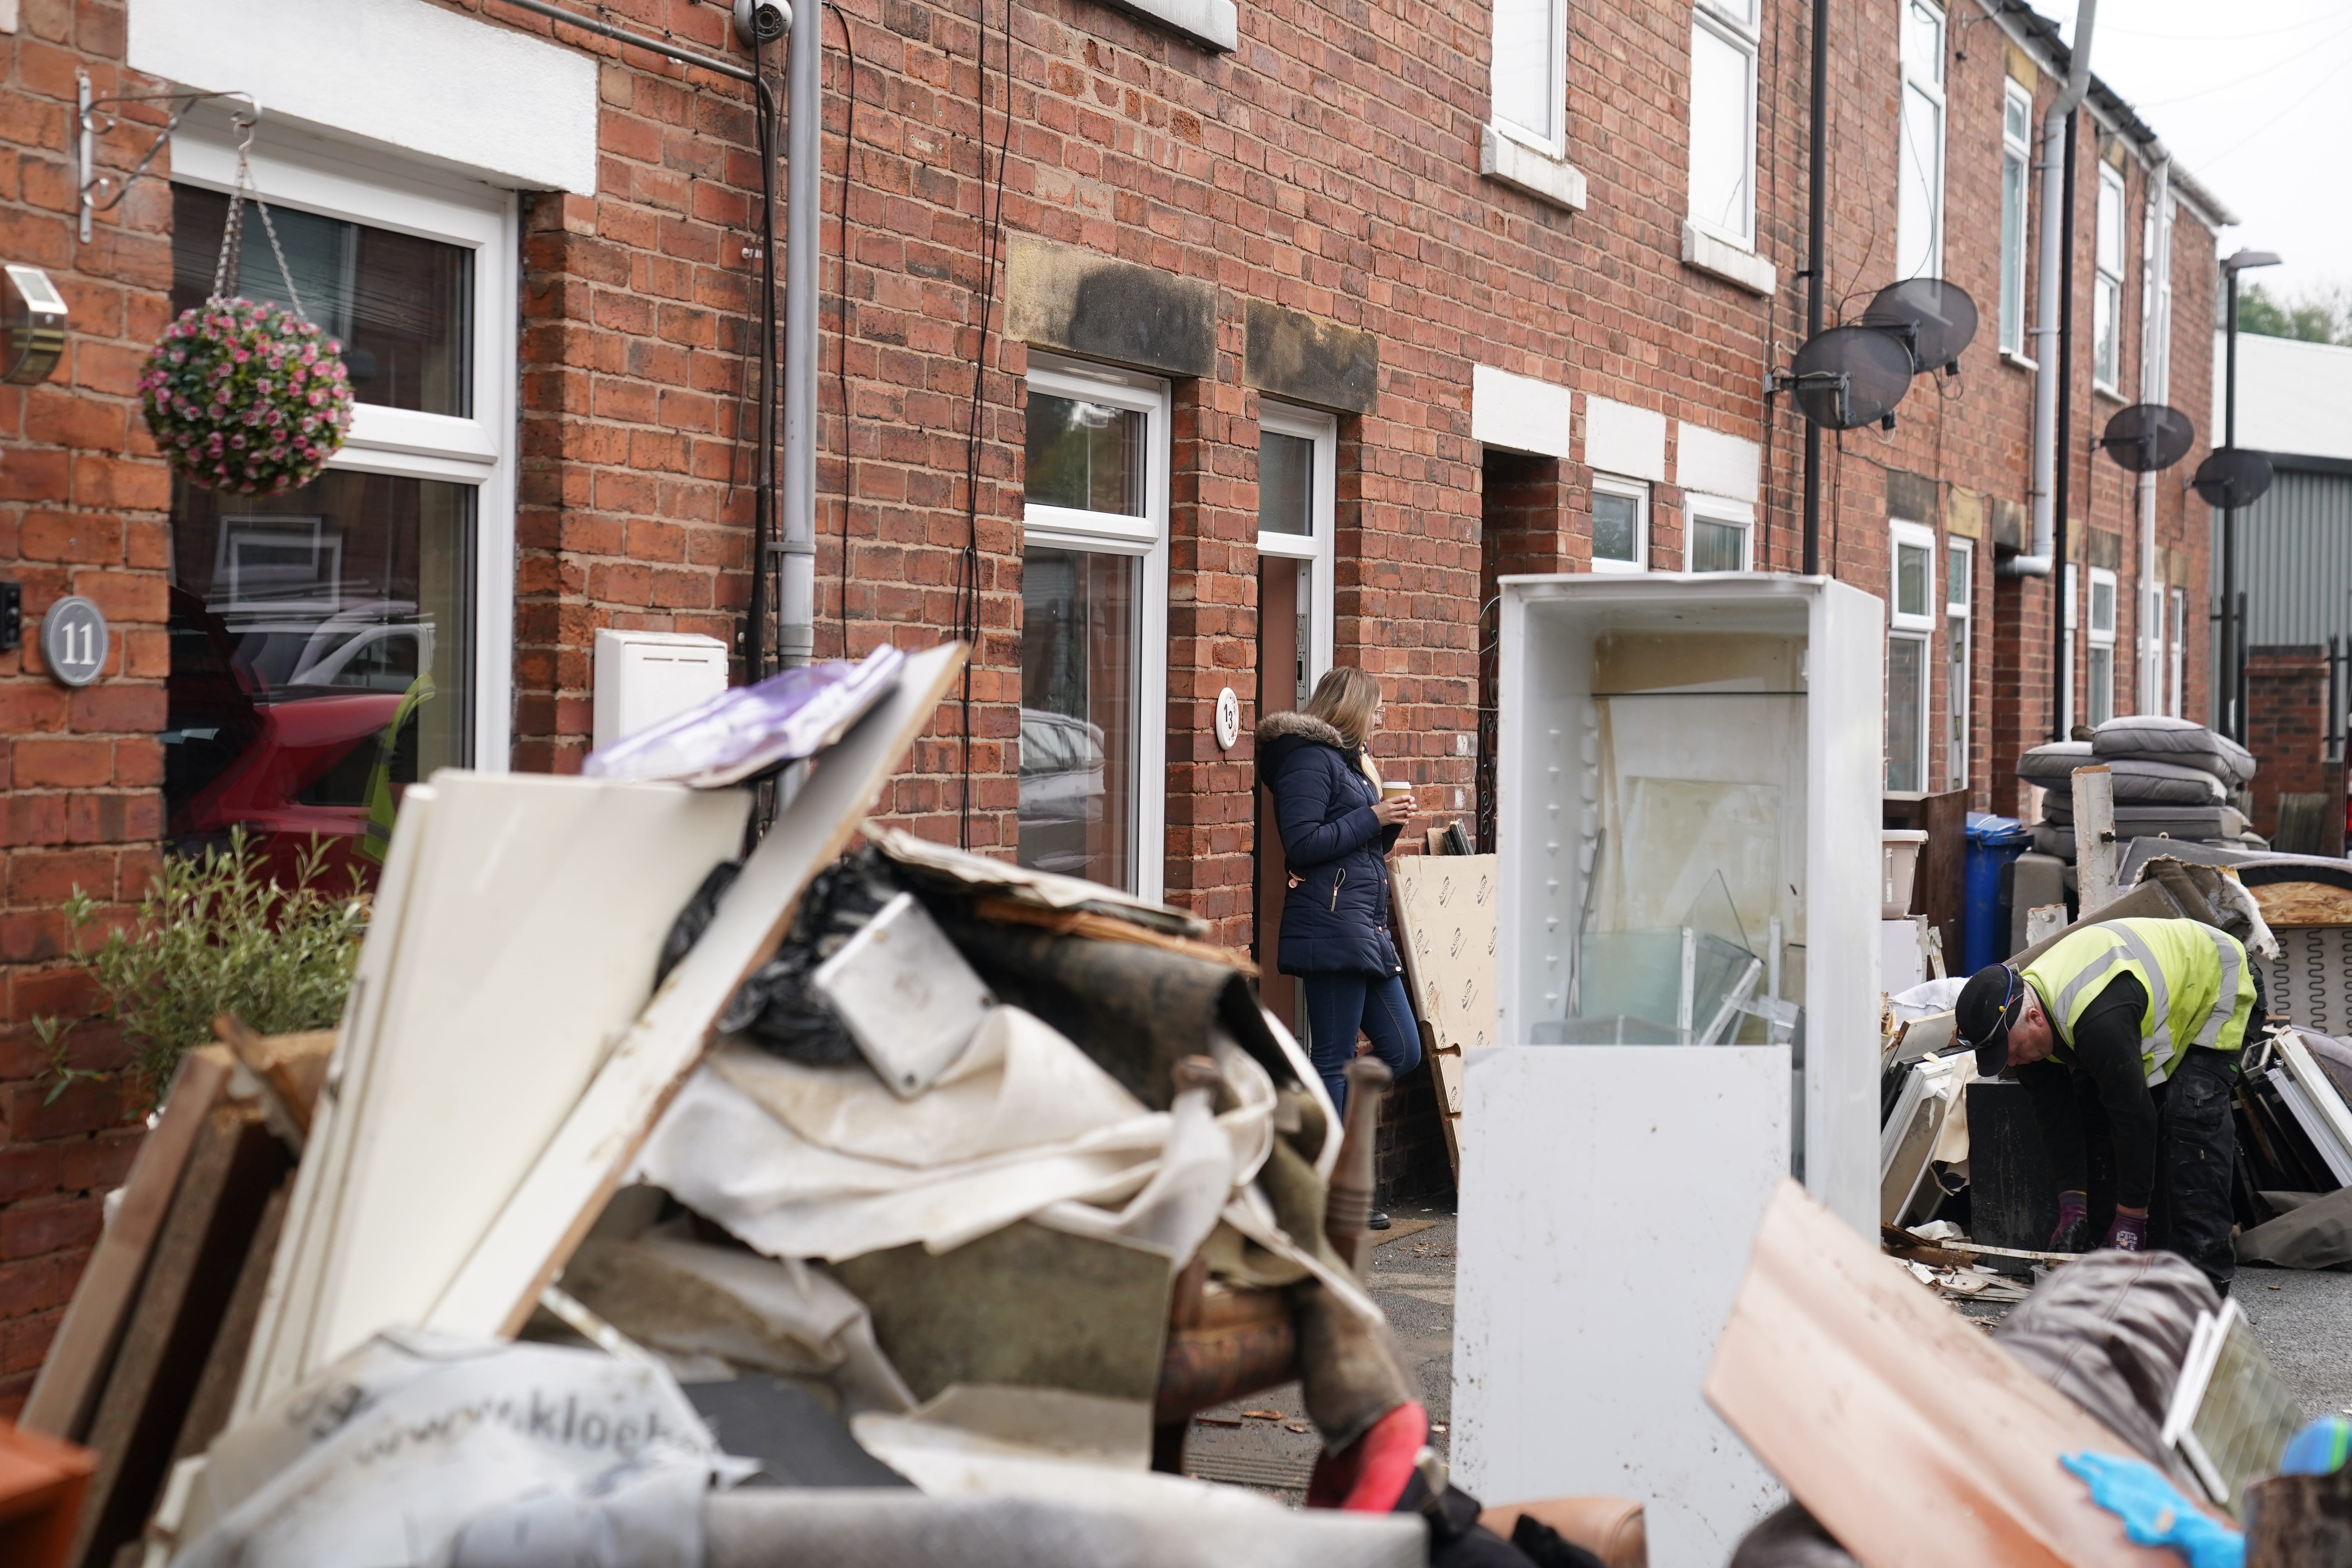 A resident looks at a local authority worker collecting damaged furniture from outside a property on Sherwood Street in Chesterfield, as the clean up began in the aftermath of Storm Babet